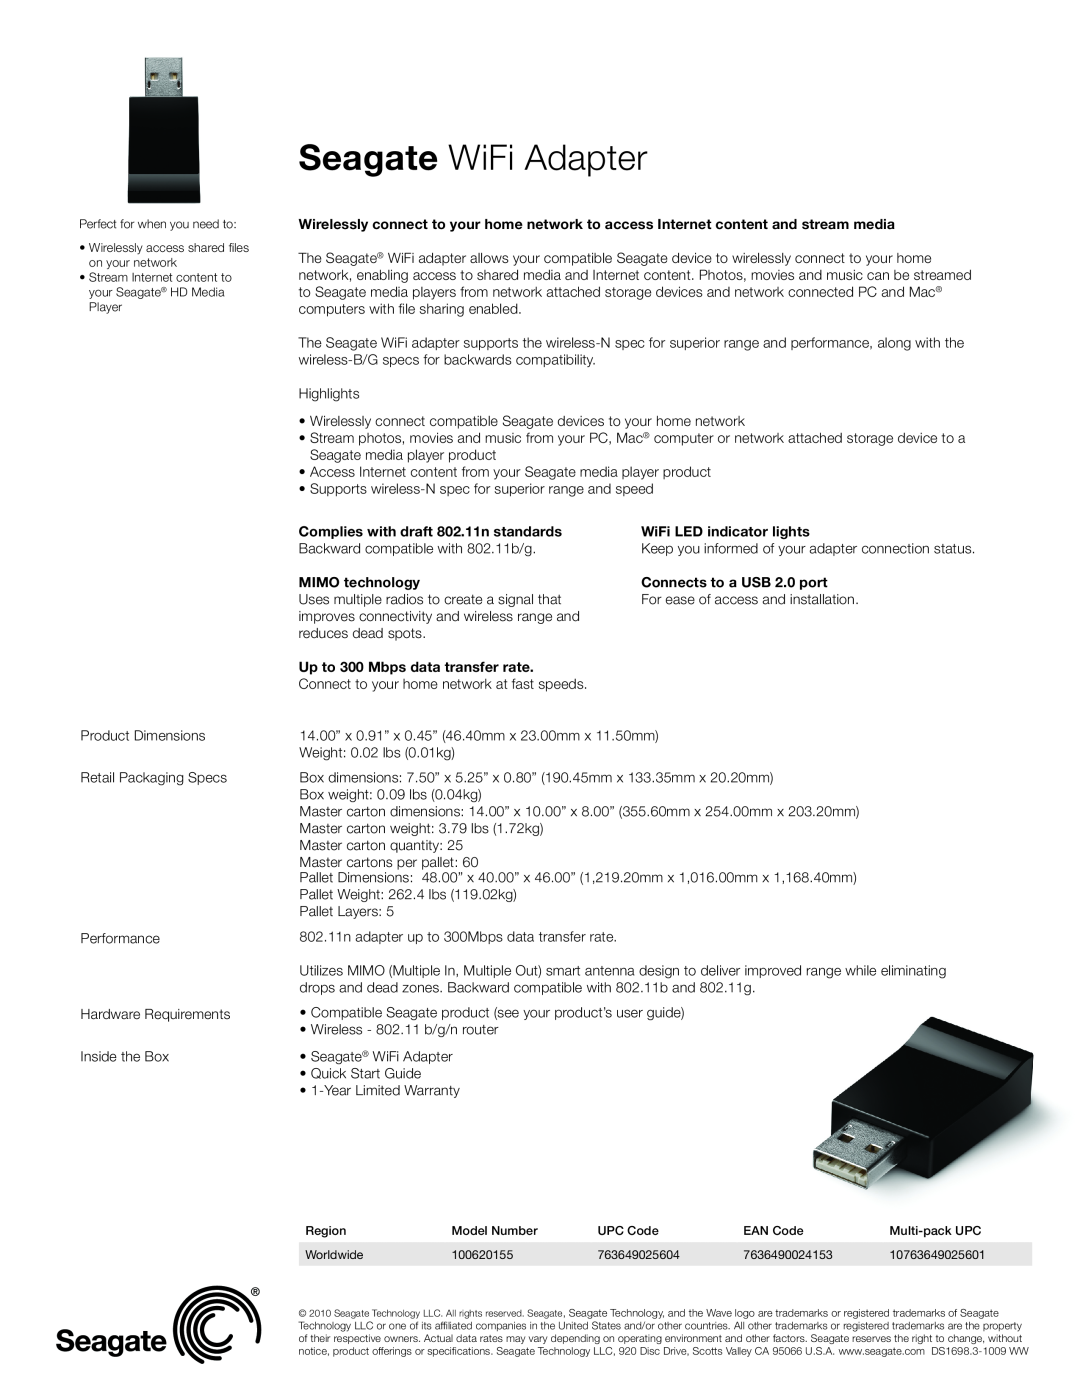 Seagate 100620155 dimensions Seagate WiFi Adapter, Complies with draft 802.11n standards, WiFi LED indicator lights 